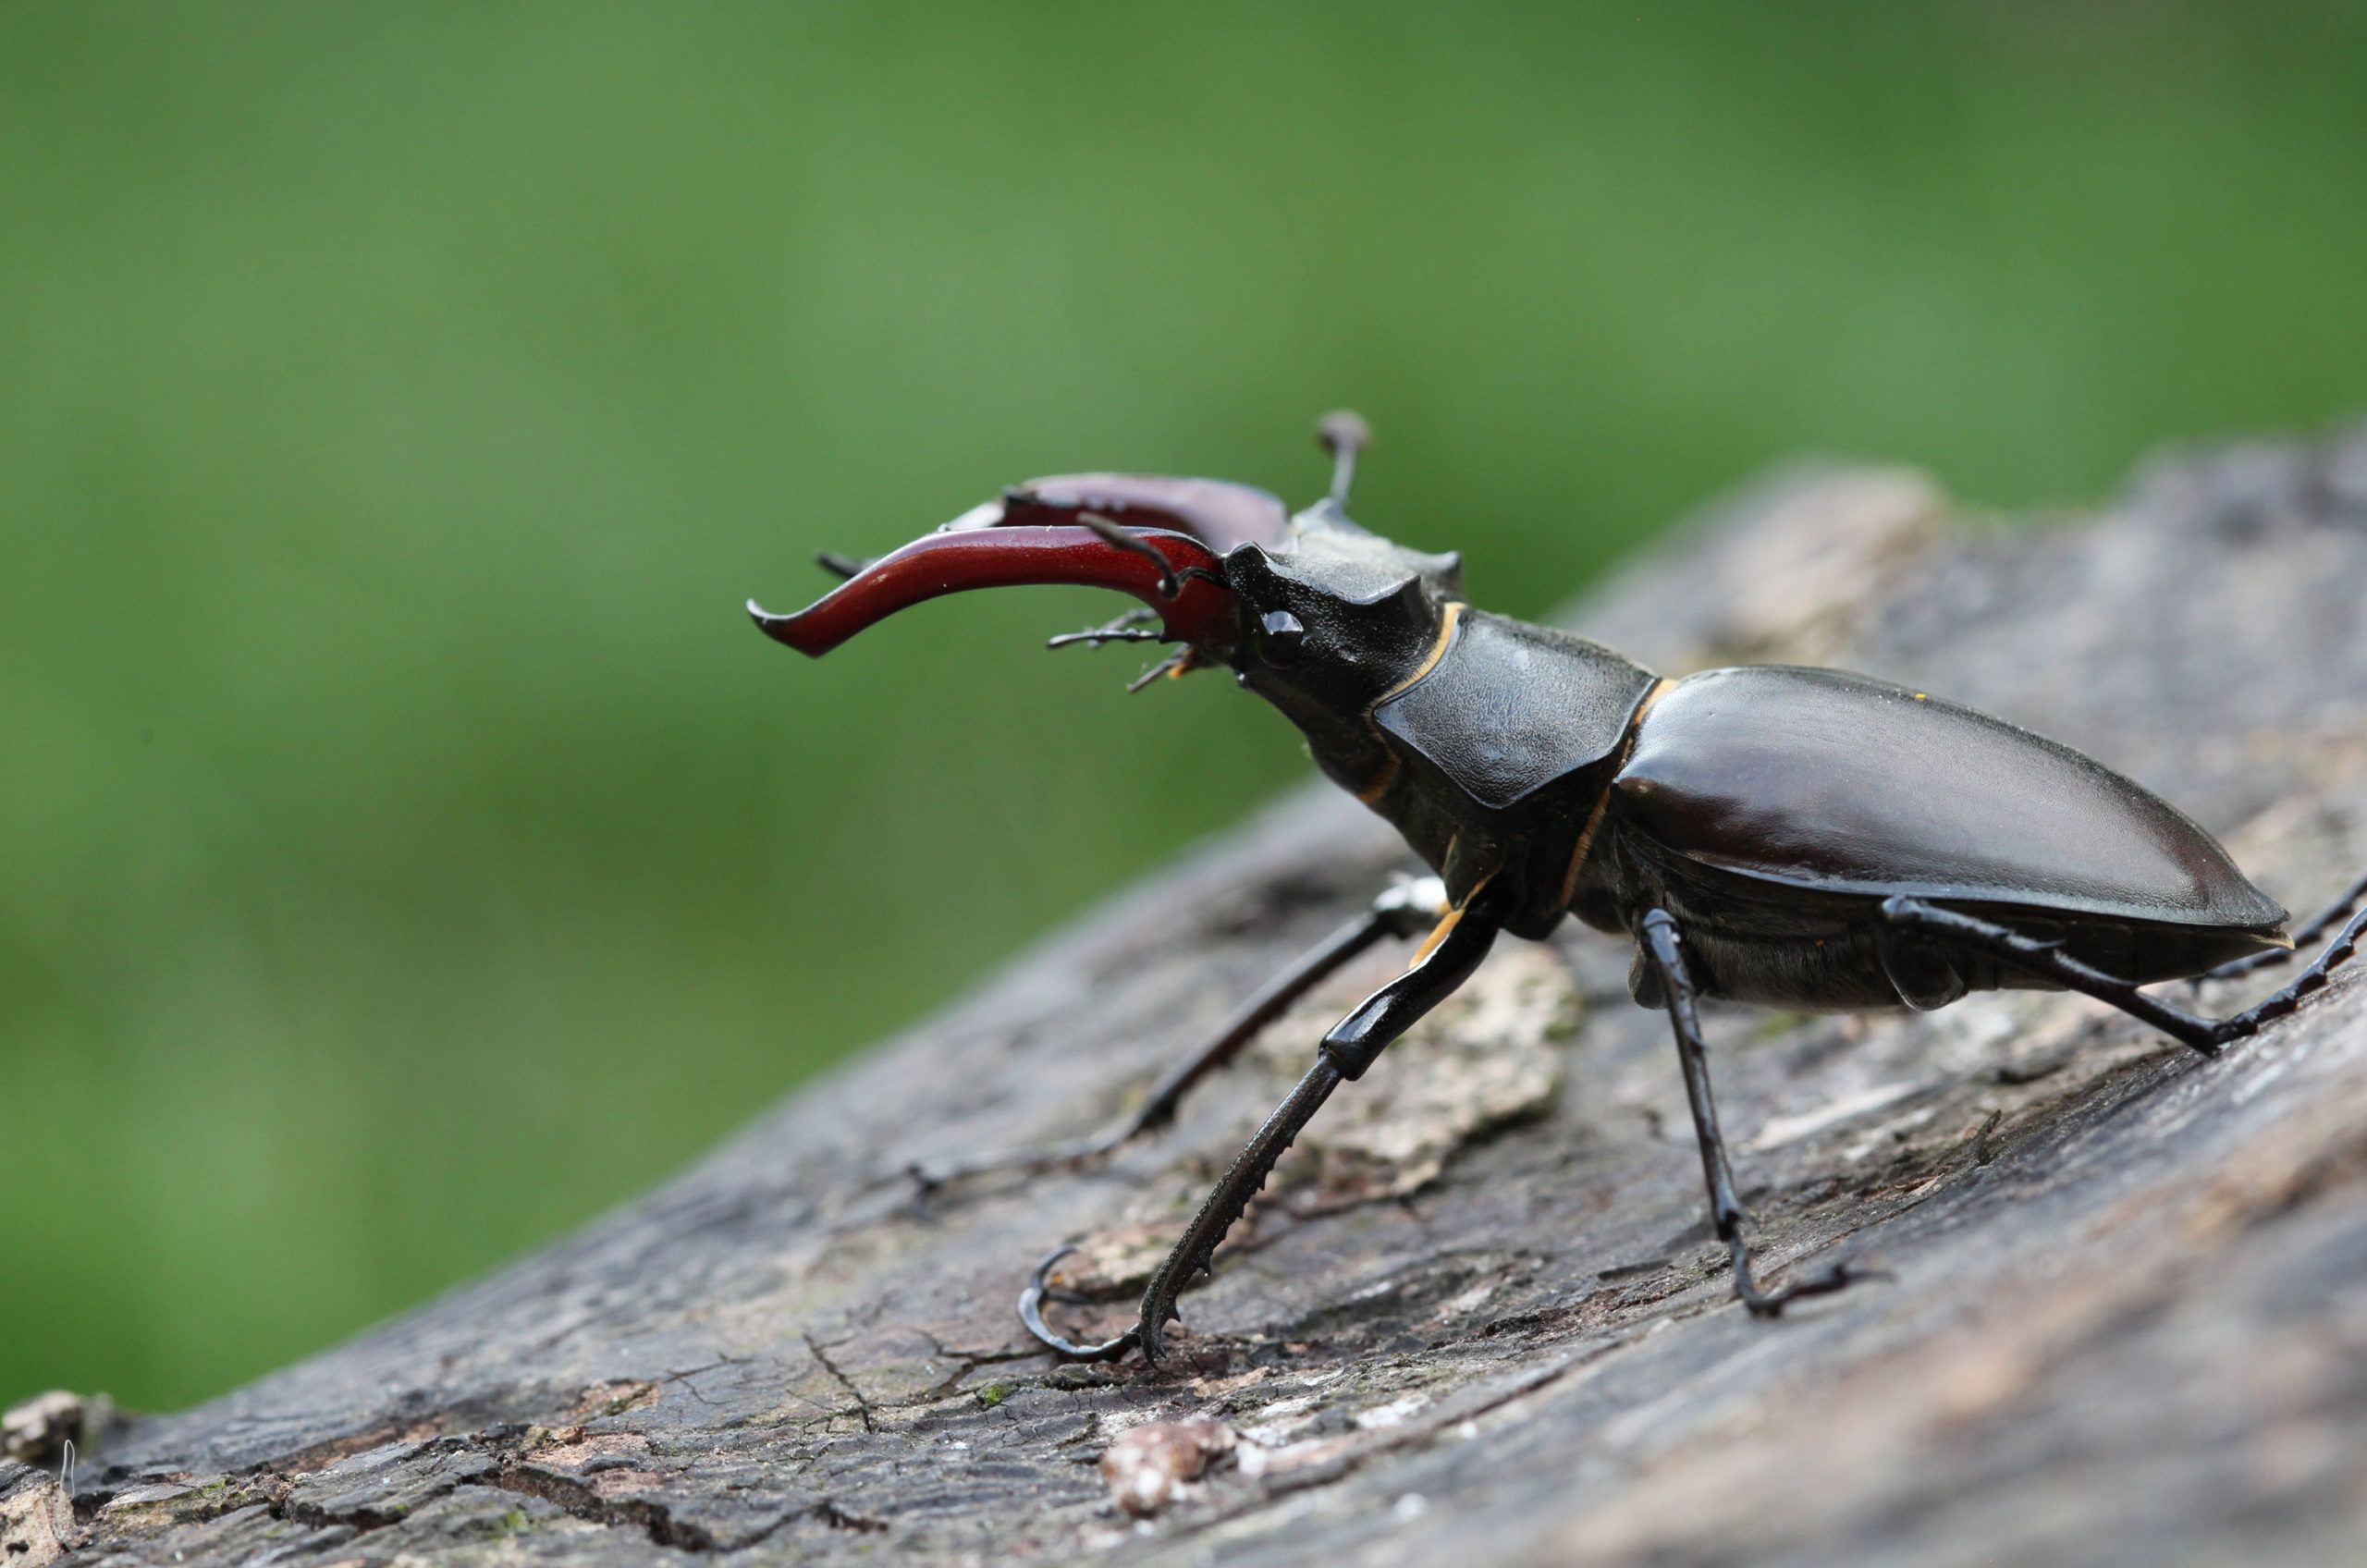 Sherie-New-male-stag-beetle-header